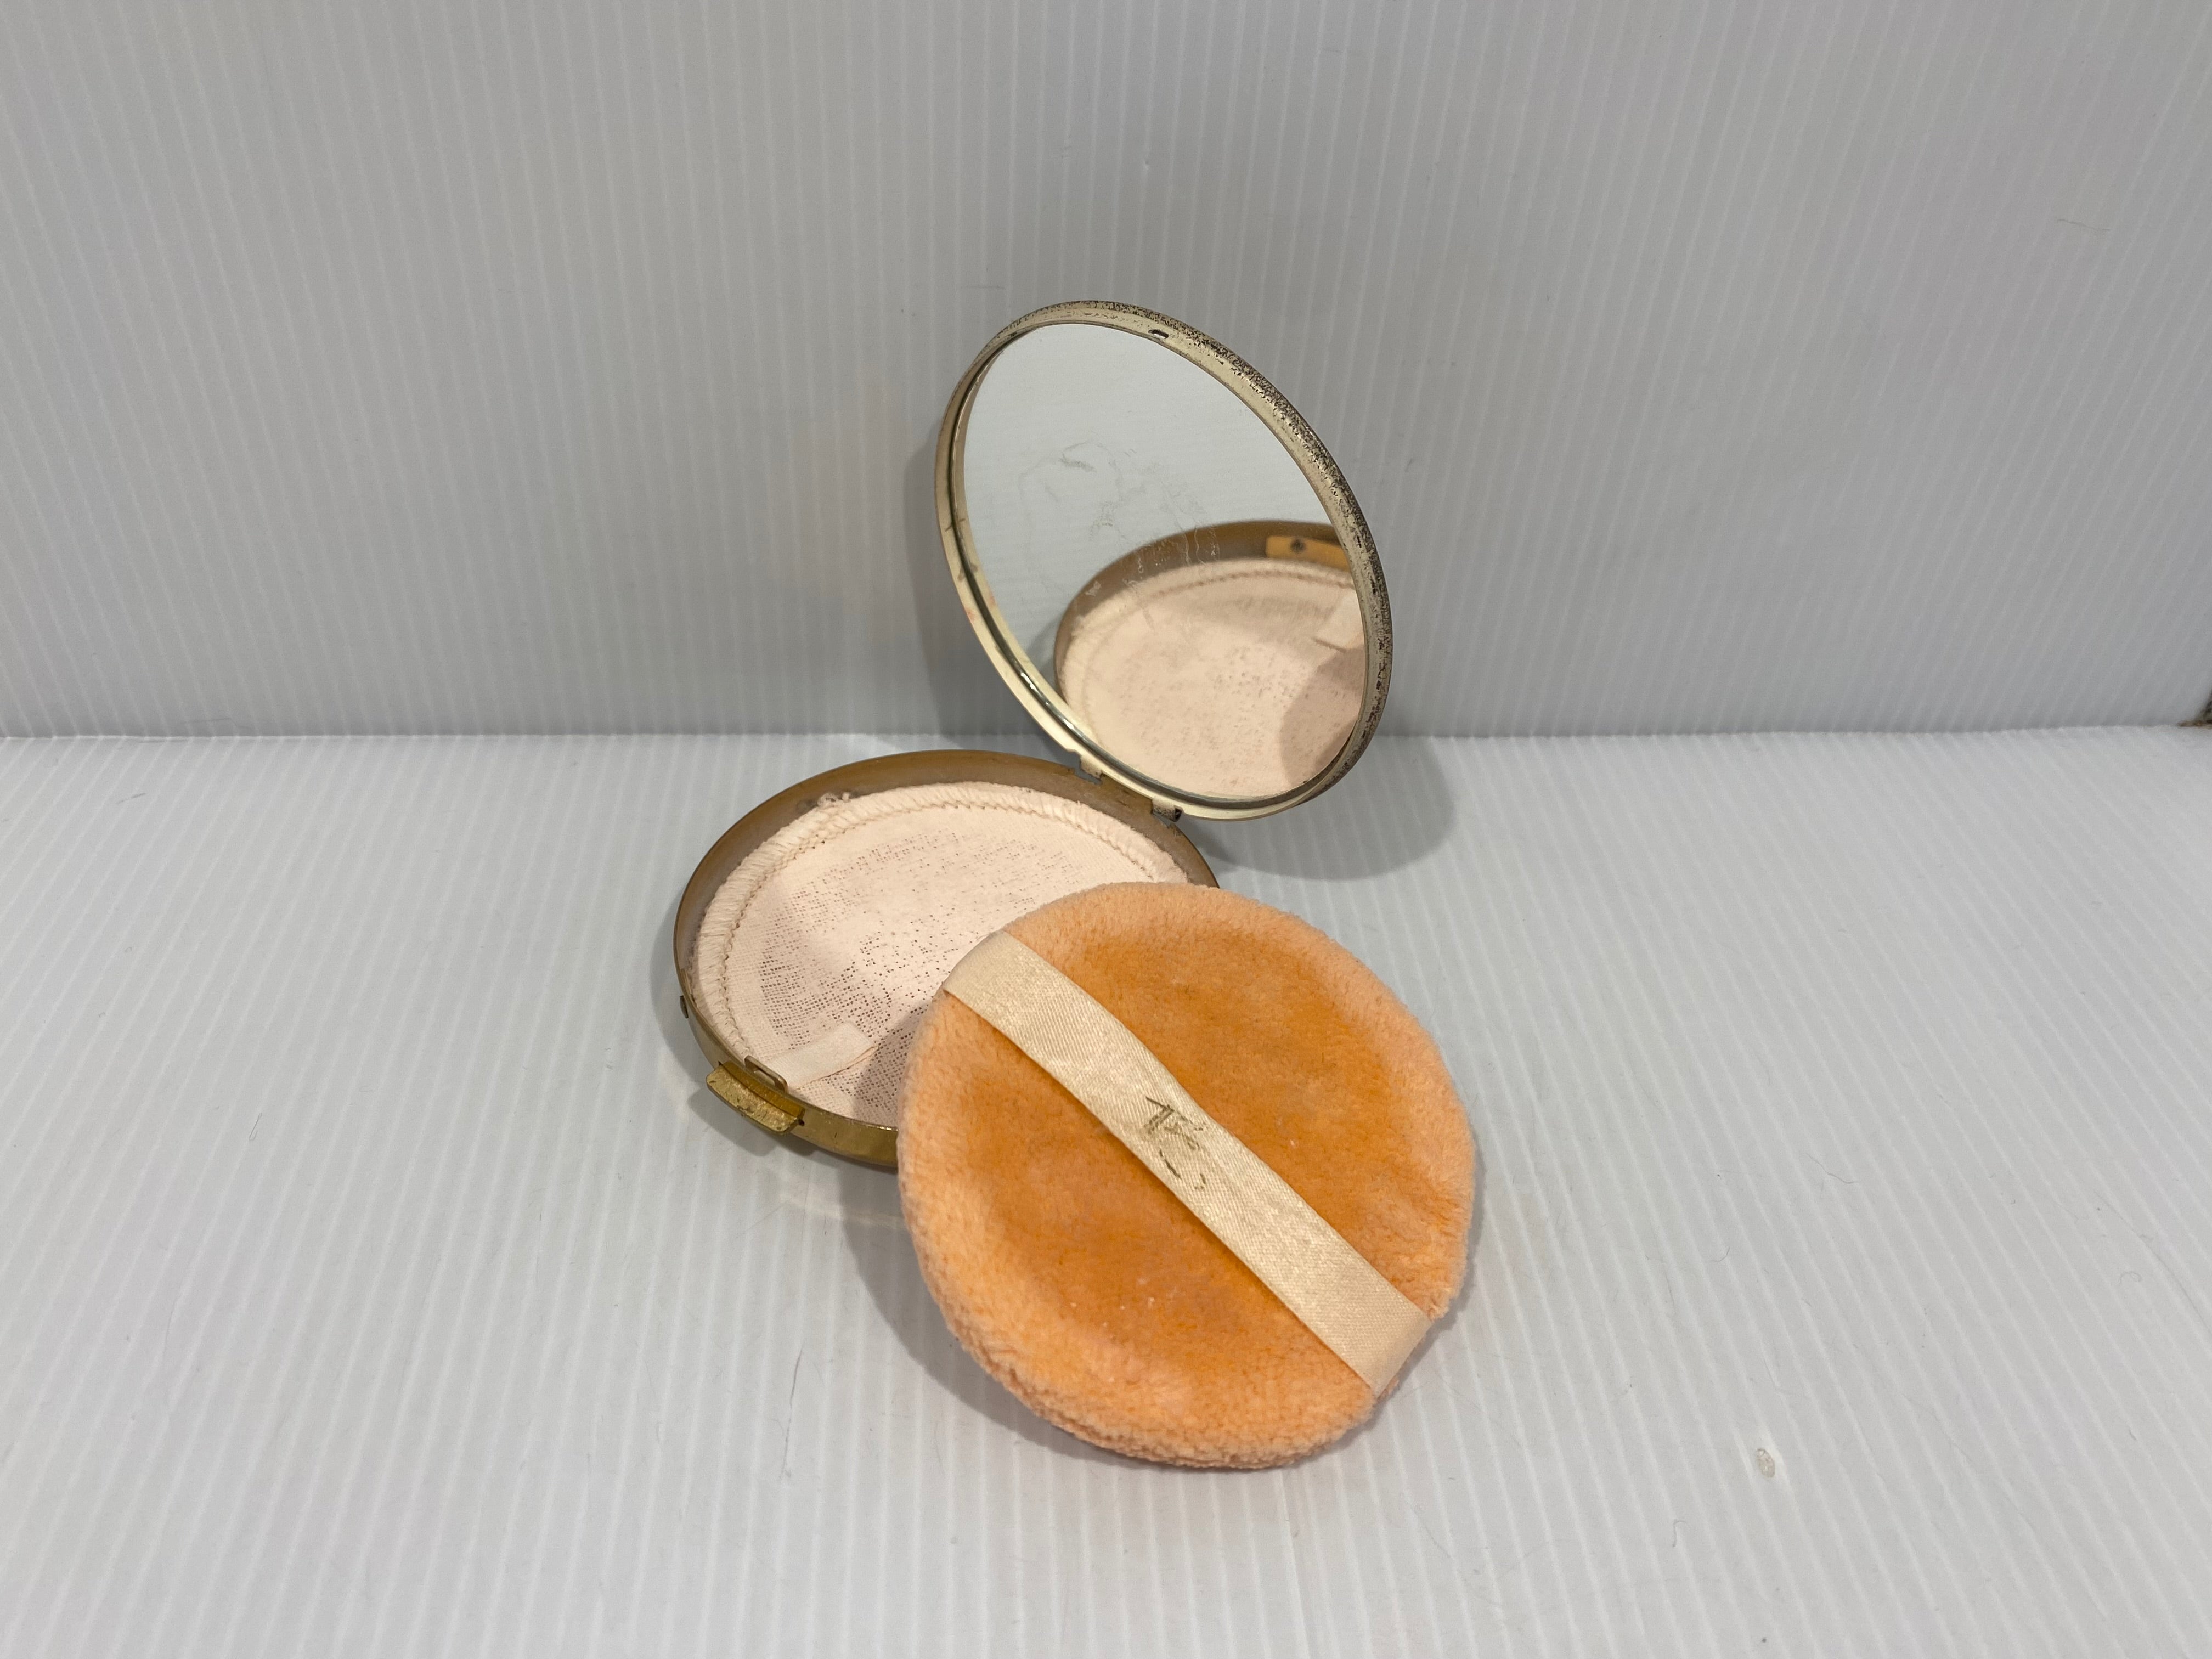 Vintage, 1950s, Makeup compact with mirror in a high quality goldtone metal case.